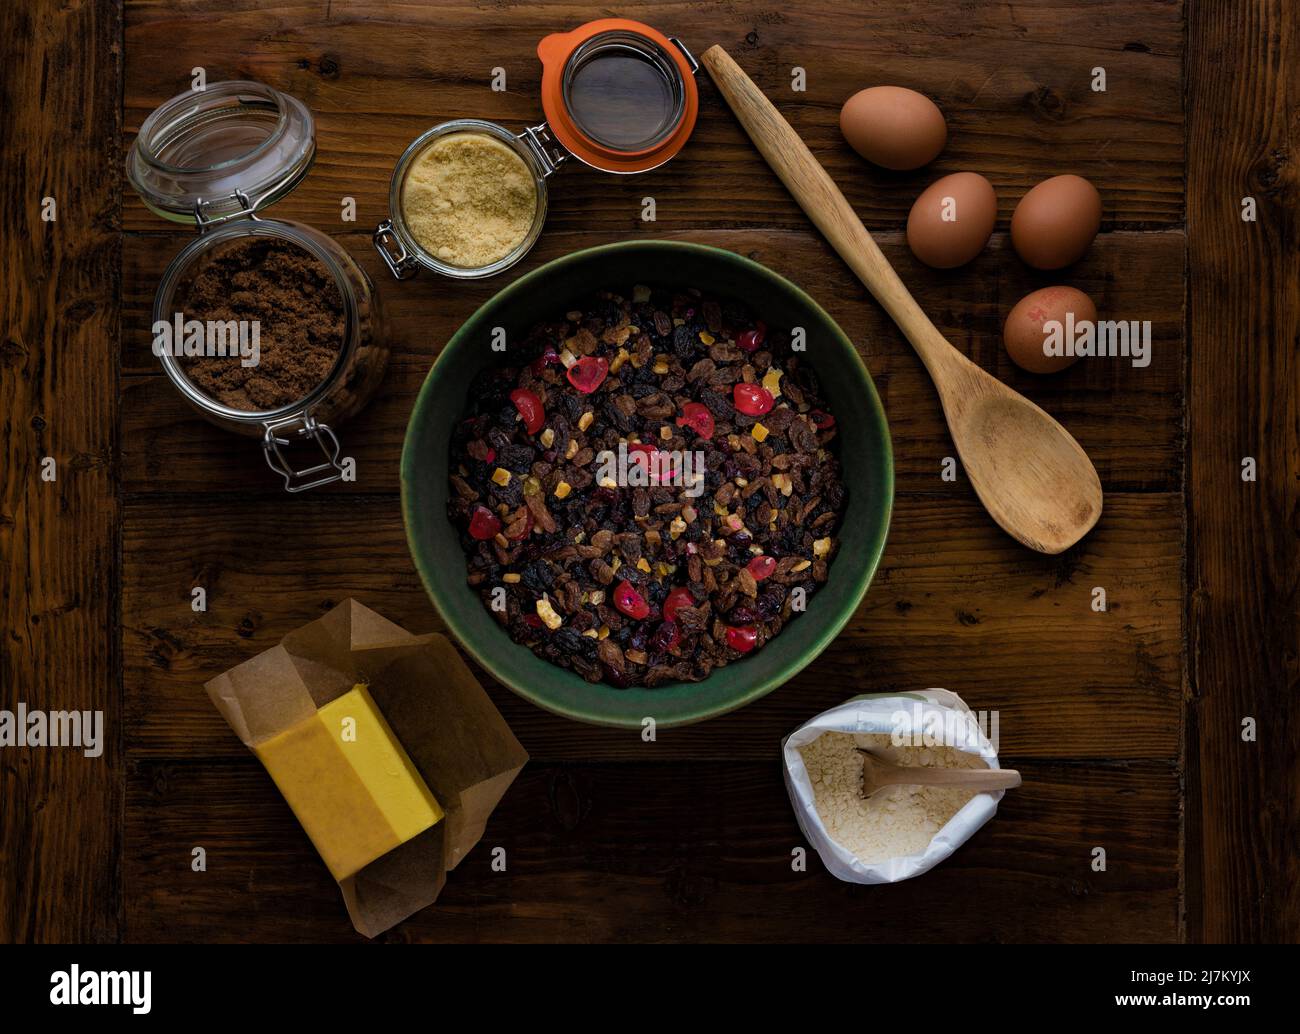 Flat lay on a dark wooden table of ingredients ready to make a fruit cake. Stock Photo